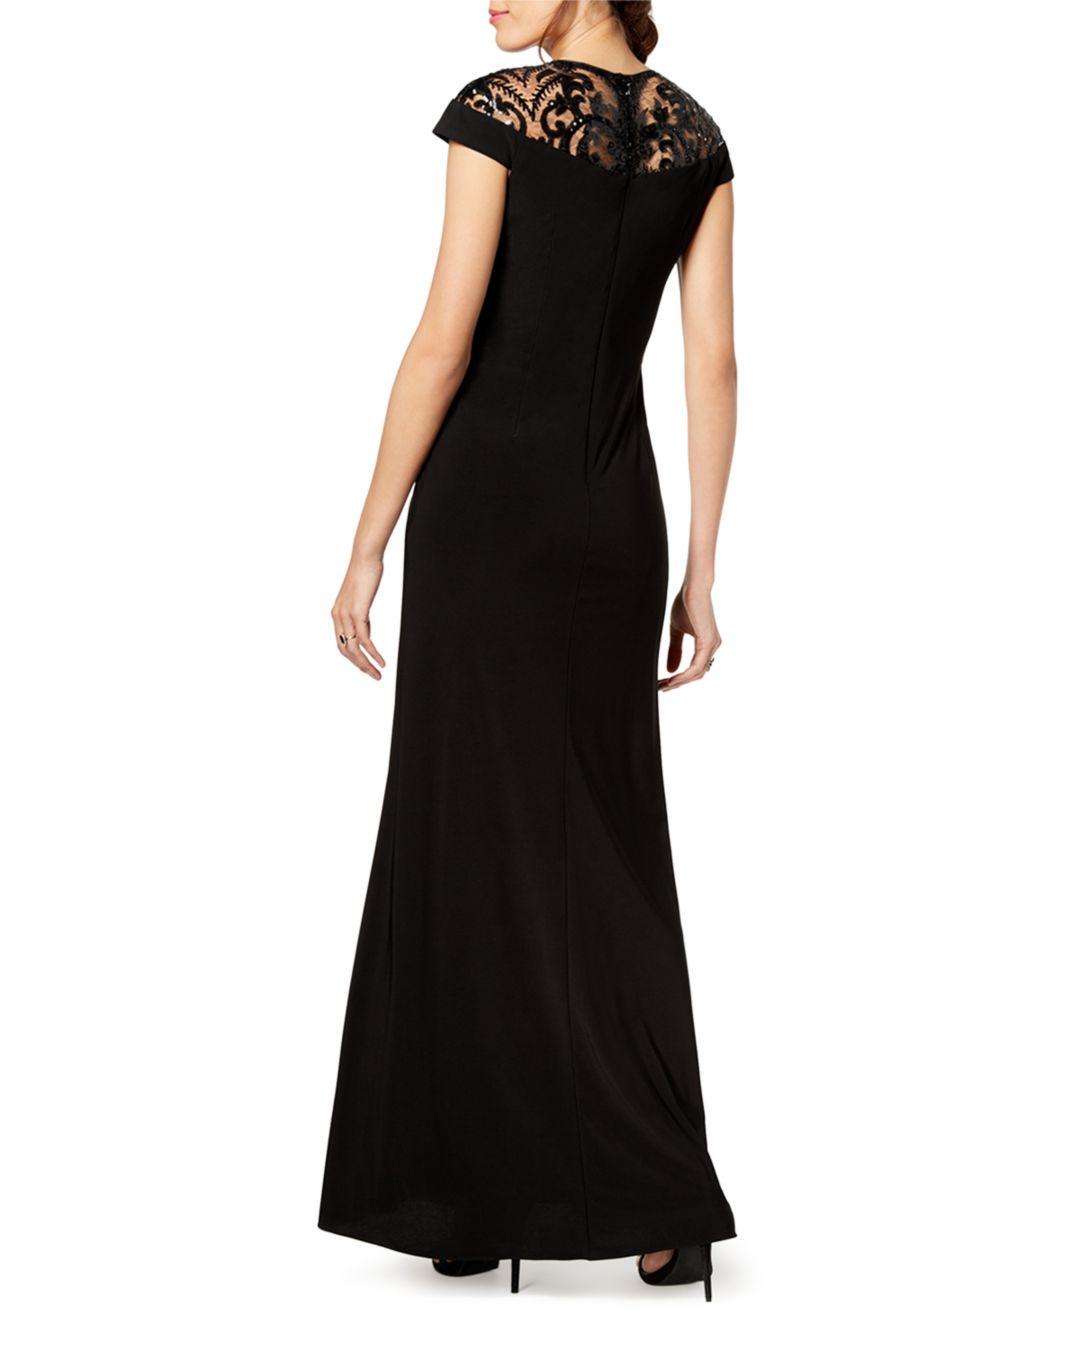 Adrianna Papell Embellished Illusion - Yoke Gown in Black - Lyst